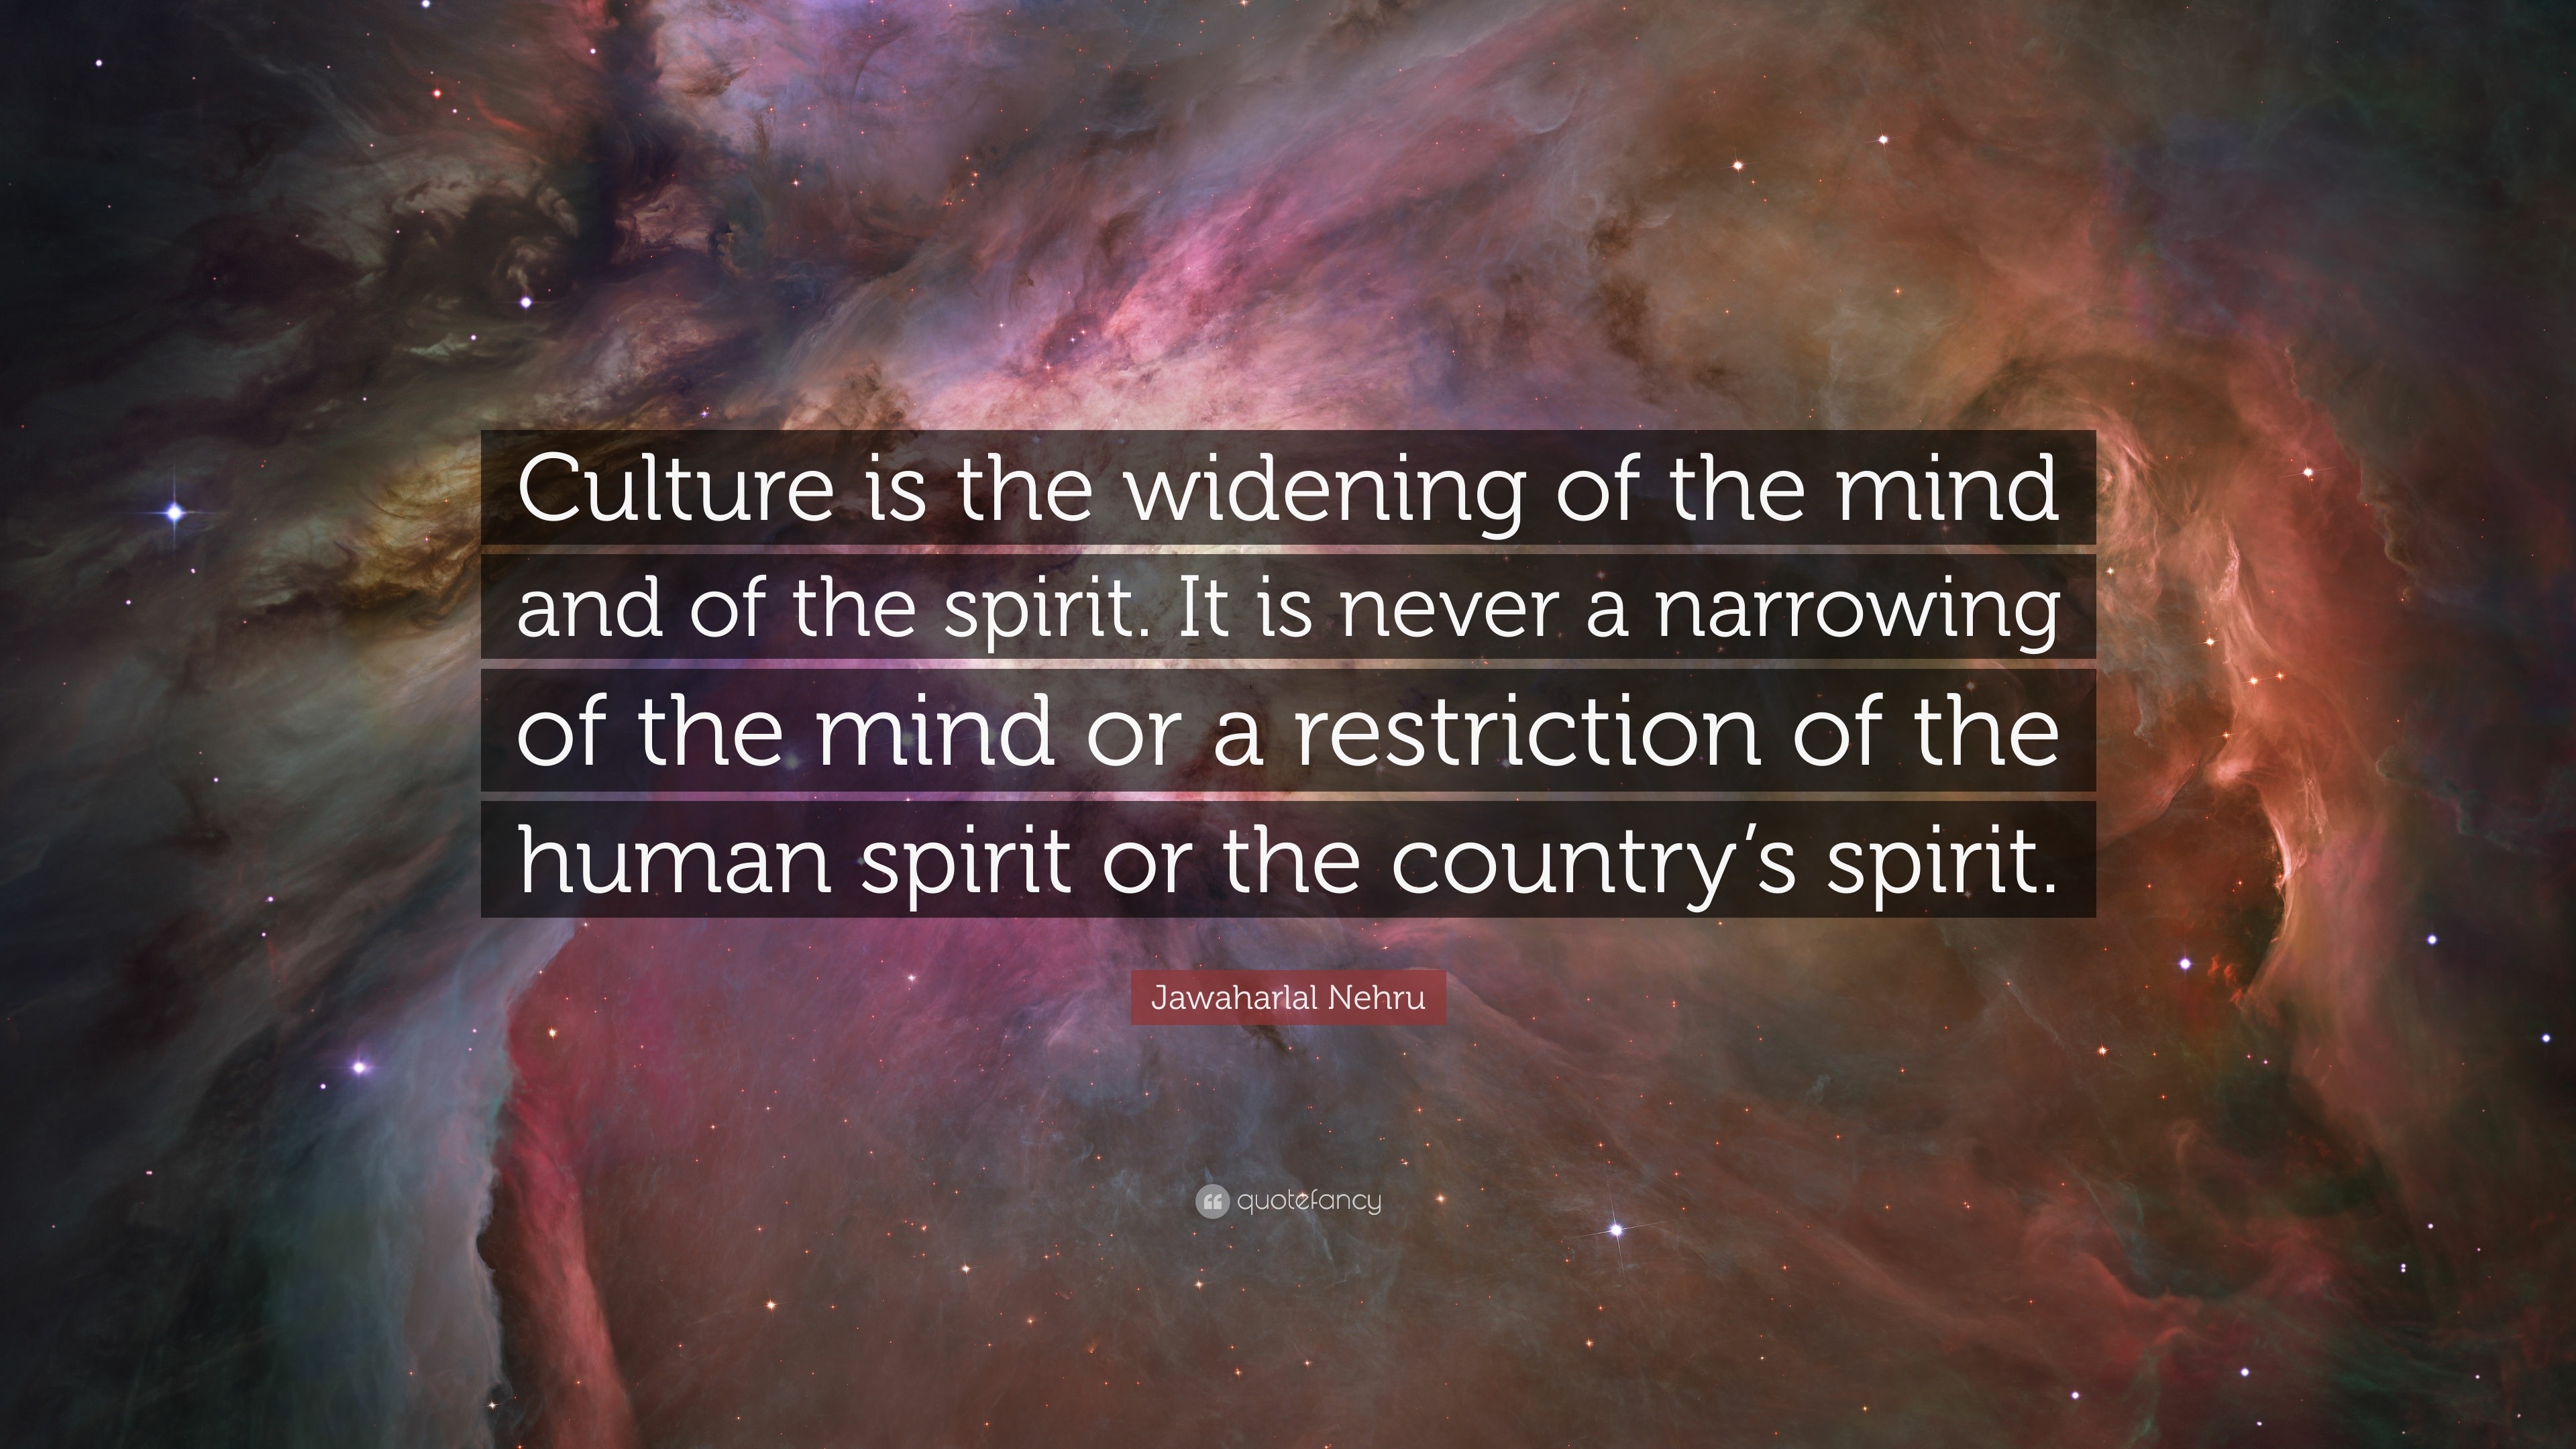 Jawaharlal Nehru Quote “Culture is the widening of the mind and of the